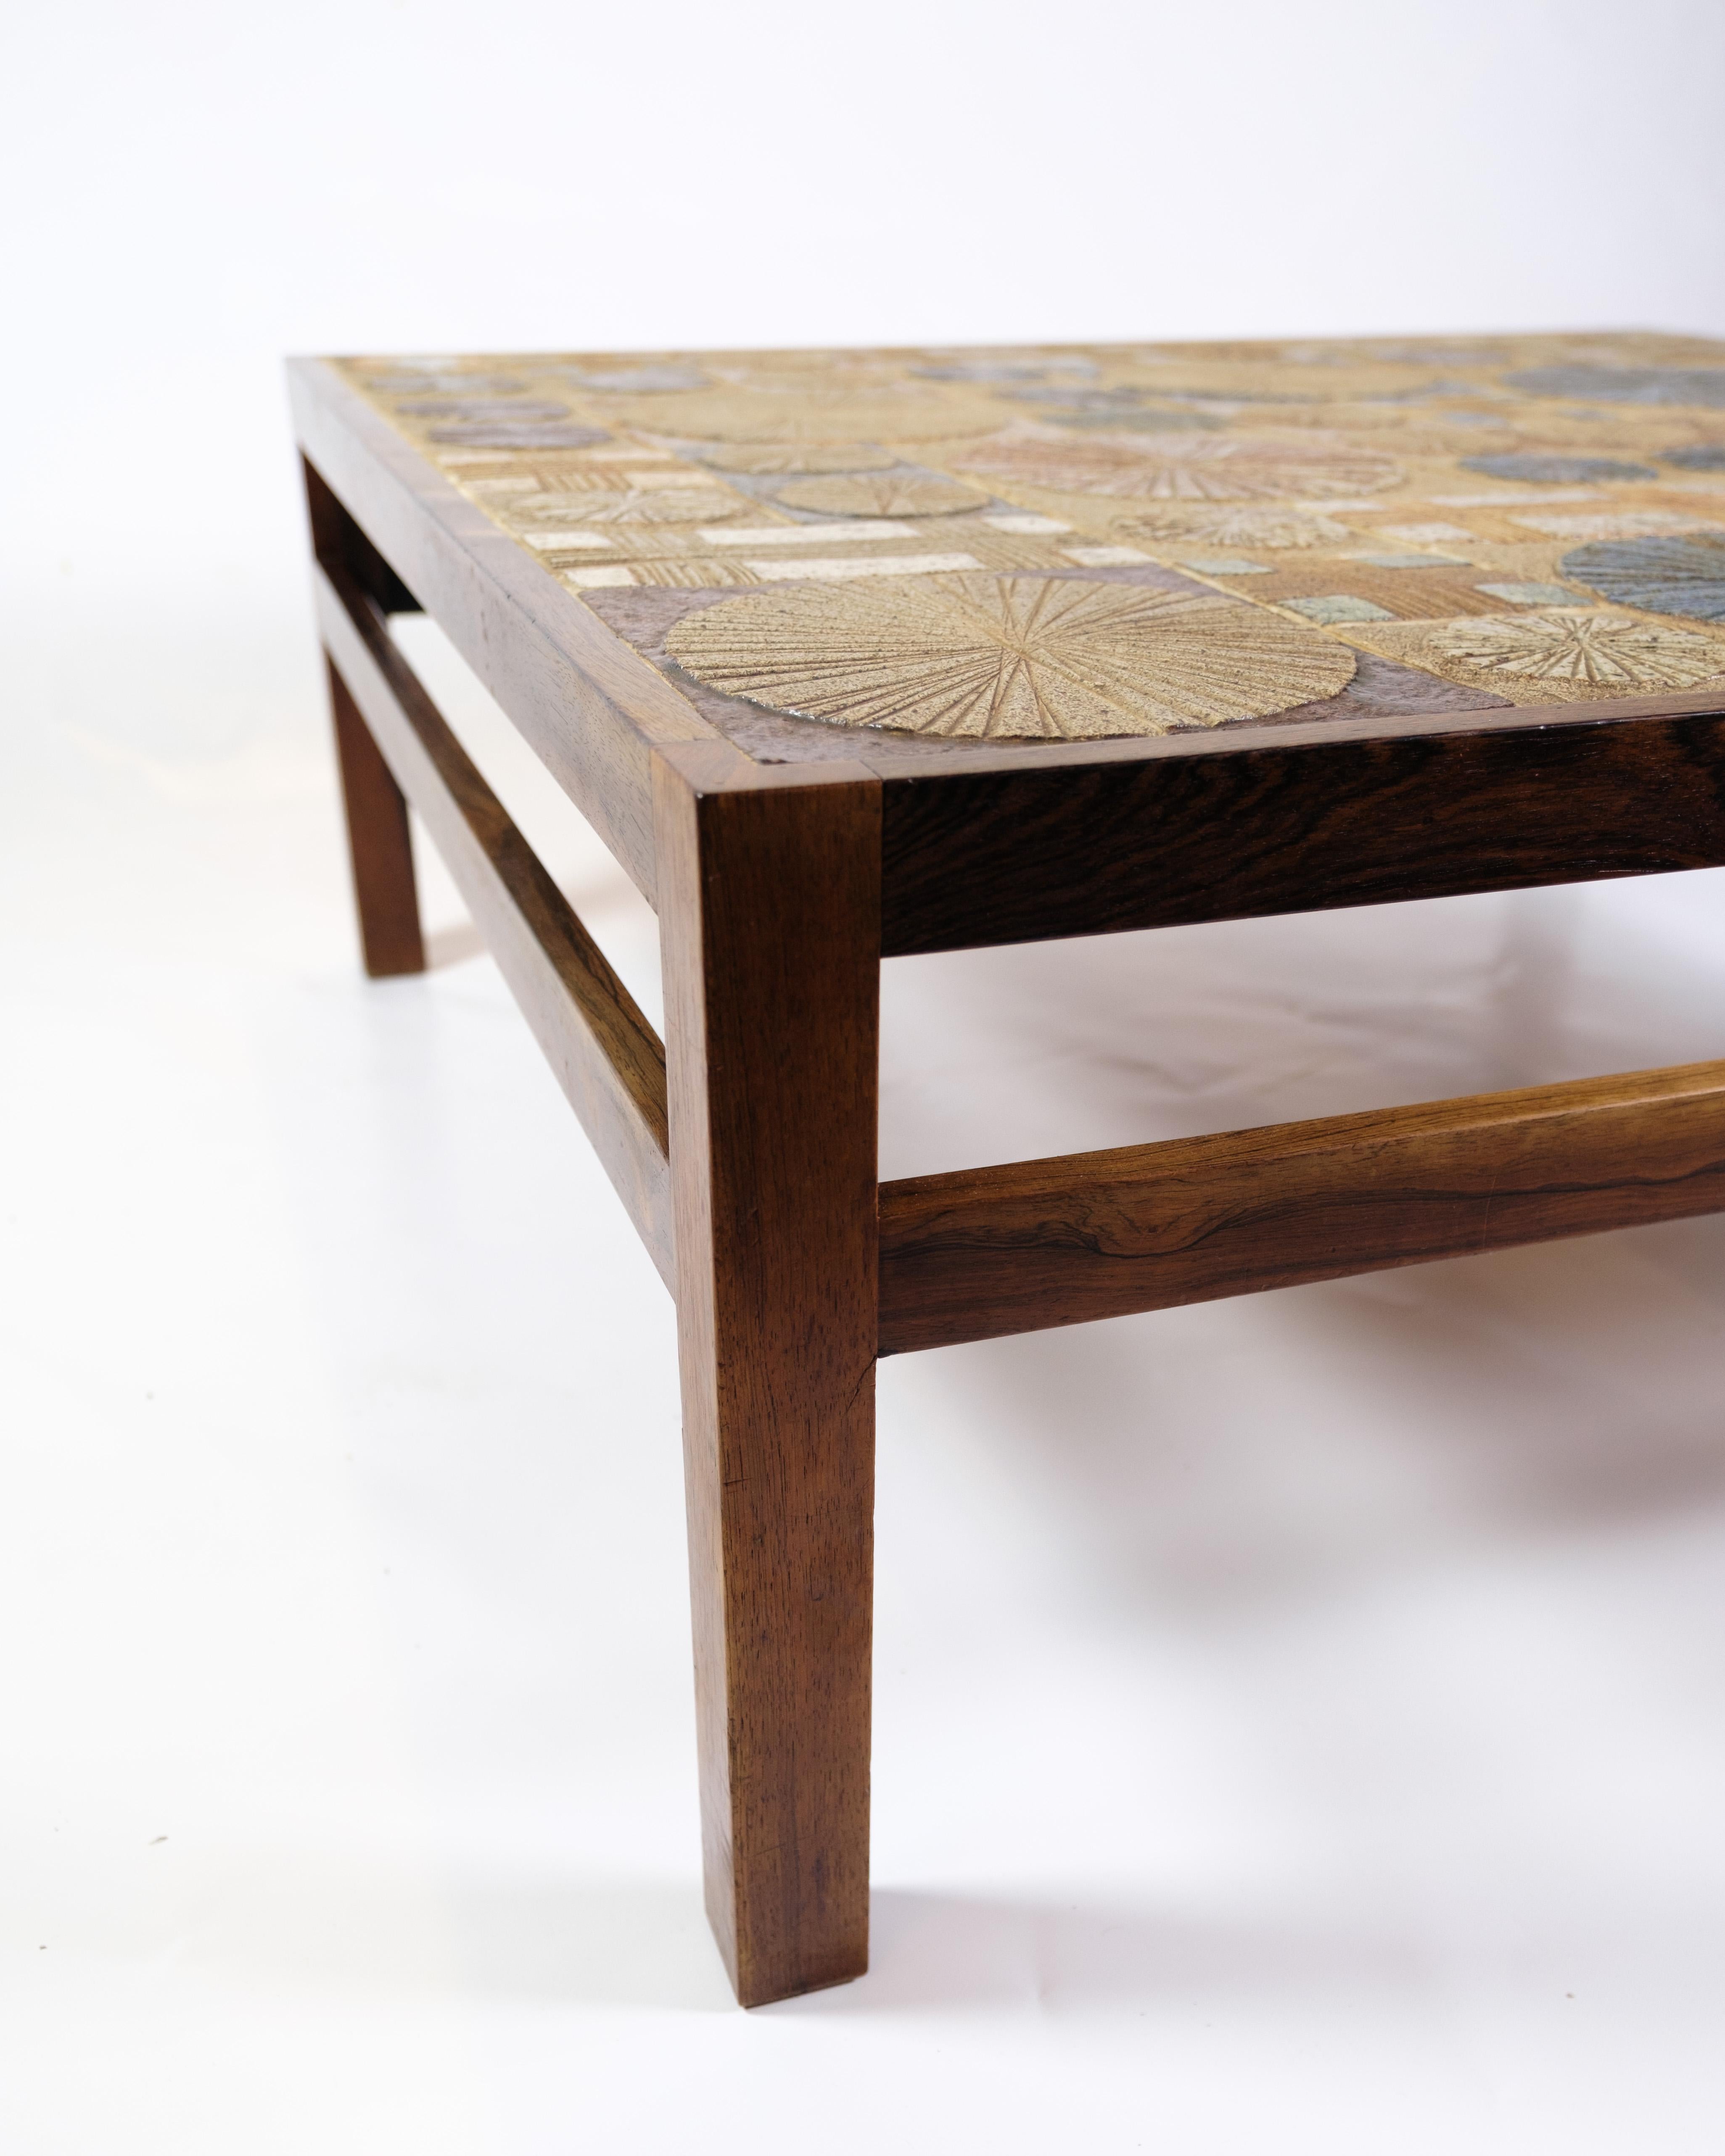 Danish Sofa Table Made In Rosewood With Tiles Designed By Tue Poulsen From 1960s For Sale